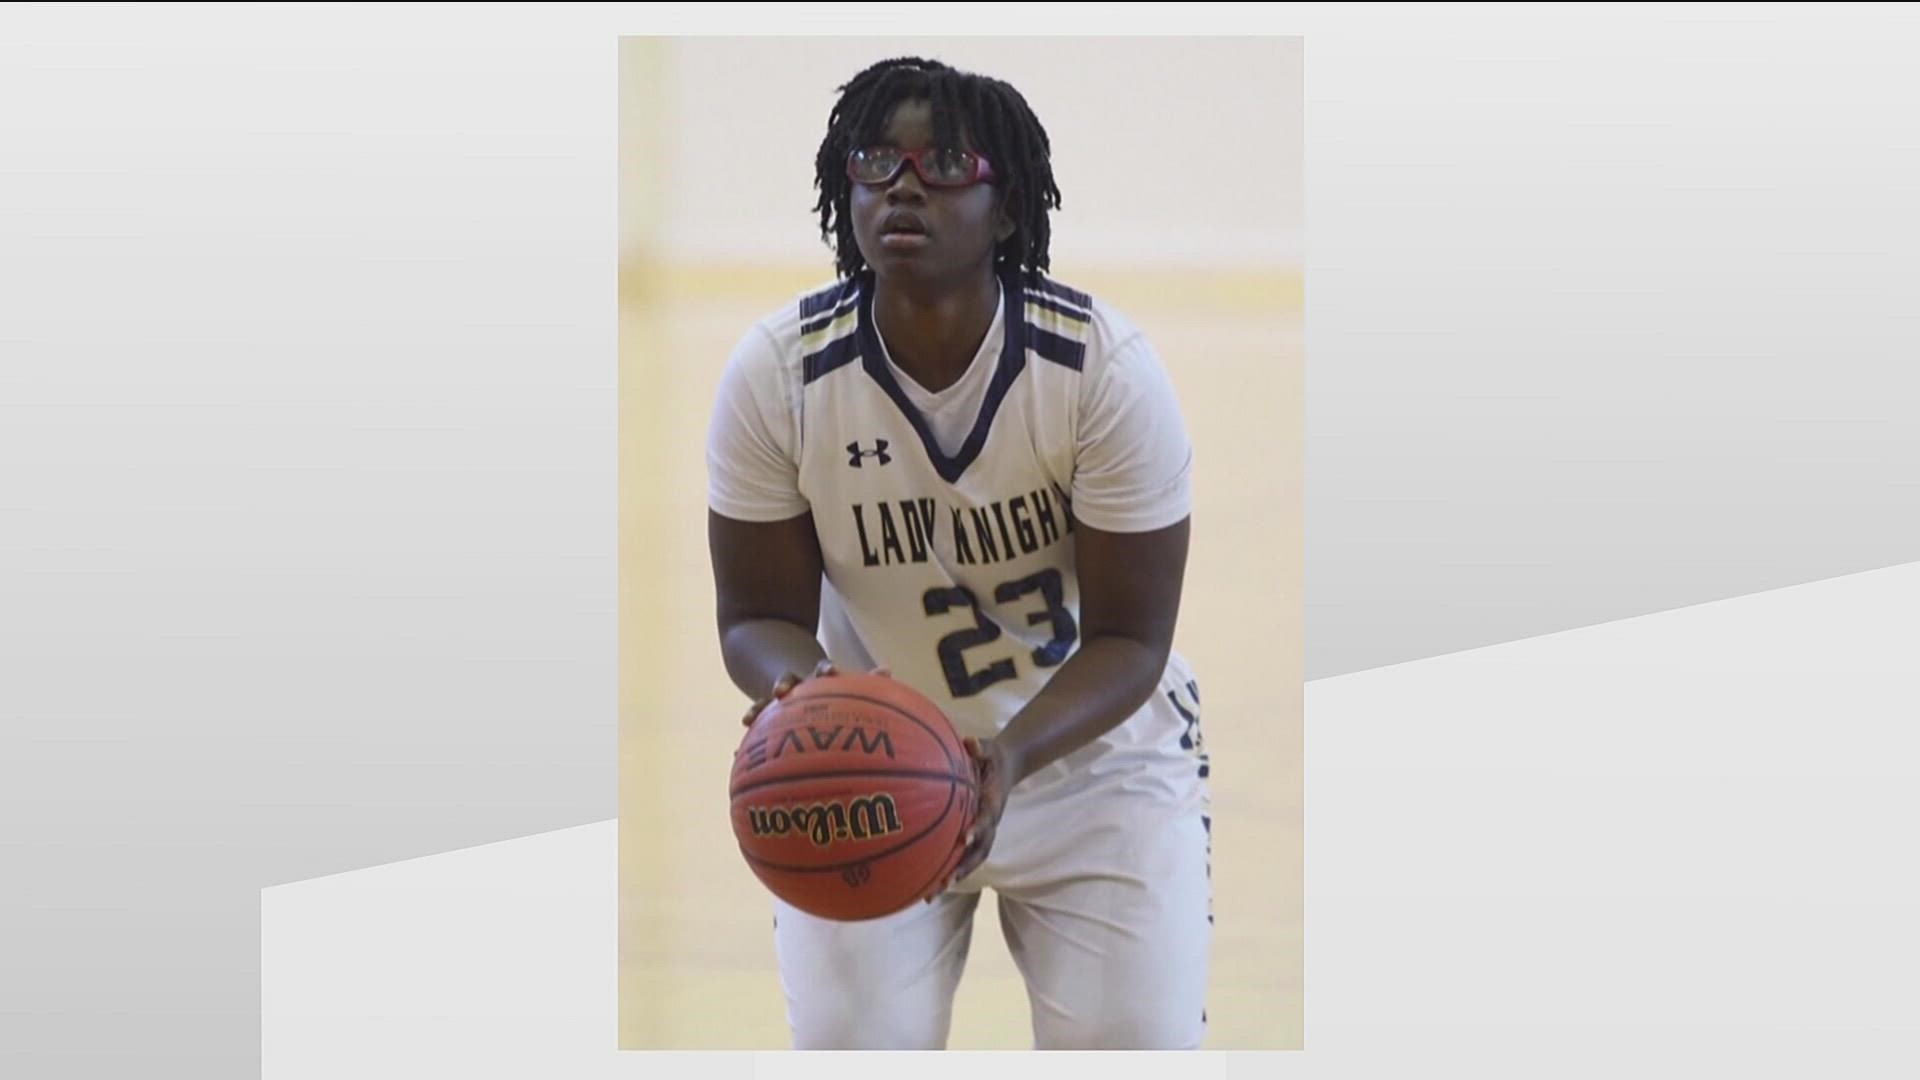 Imani Bell died following an outdoor high school basketball practice on a hot afternoon in August of 2019.